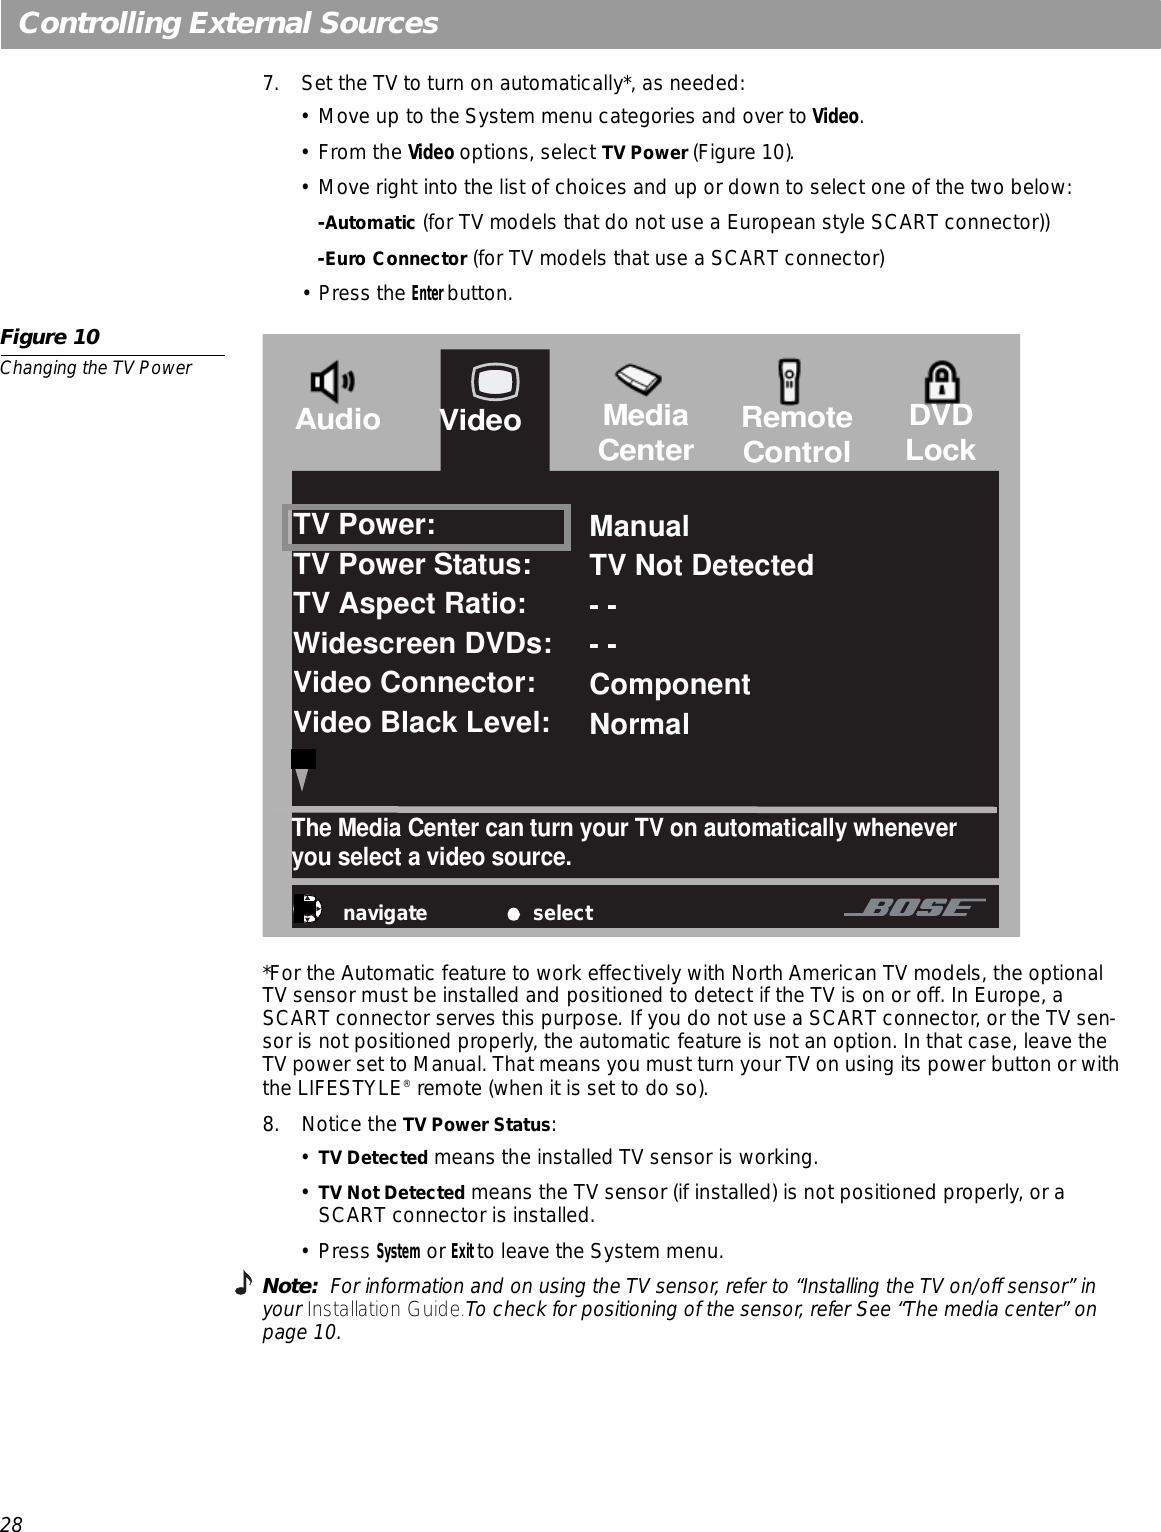 28Controlling External Sources7. Set the TV to turn on automatically*, as needed:• Move up to the System menu categories and over to Video.•From the Video options, select TV Power (Figure 10).• Move right into the list of choices and up or down to select one of the two below:-Automatic (for TV models that do not use a European style SCART connector))-Euro Connector (for TV models that use a SCART connector)•Press the Enter button. Figure 10Changing the TV Power *For the Automatic feature to work effectively with North American TV models, the optional TV sensor must be installed and positioned to detect if the TV is on or off. In Europe, a SCART connector serves this purpose. If you do not use a SCART connector, or the TV sen-sor is not positioned properly, the automatic feature is not an option. In that case, leave the TV power set to Manual. That means you must turn your TV on using its power button or with the LIFESTYLE® remote (when it is set to do so).8. Notice the TV Power Status:•TV Detected means the installed TV sensor is working. •TV Not Detected means the TV sensor (if installed) is not positioned properly, or a SCART connector is installed.•Press System or Exit to leave the System menu.Note:  For information and on using the TV sensor, refer to “Installing the TV on/off sensor” in your Installation Guide.To check for positioning of the sensor, refer See “The media center” on page 10.navigate selectThe Media Center can turn your TV on automatically whenever  you select a video source.TV Power:TV Power Status:TV Aspect Ratio:Widescreen DVDs:Video Connector:Video Black Level:ManualTV Not Detected- -- -ComponentNormalVideoAudio MediaCenter RemoteControl DVDLock